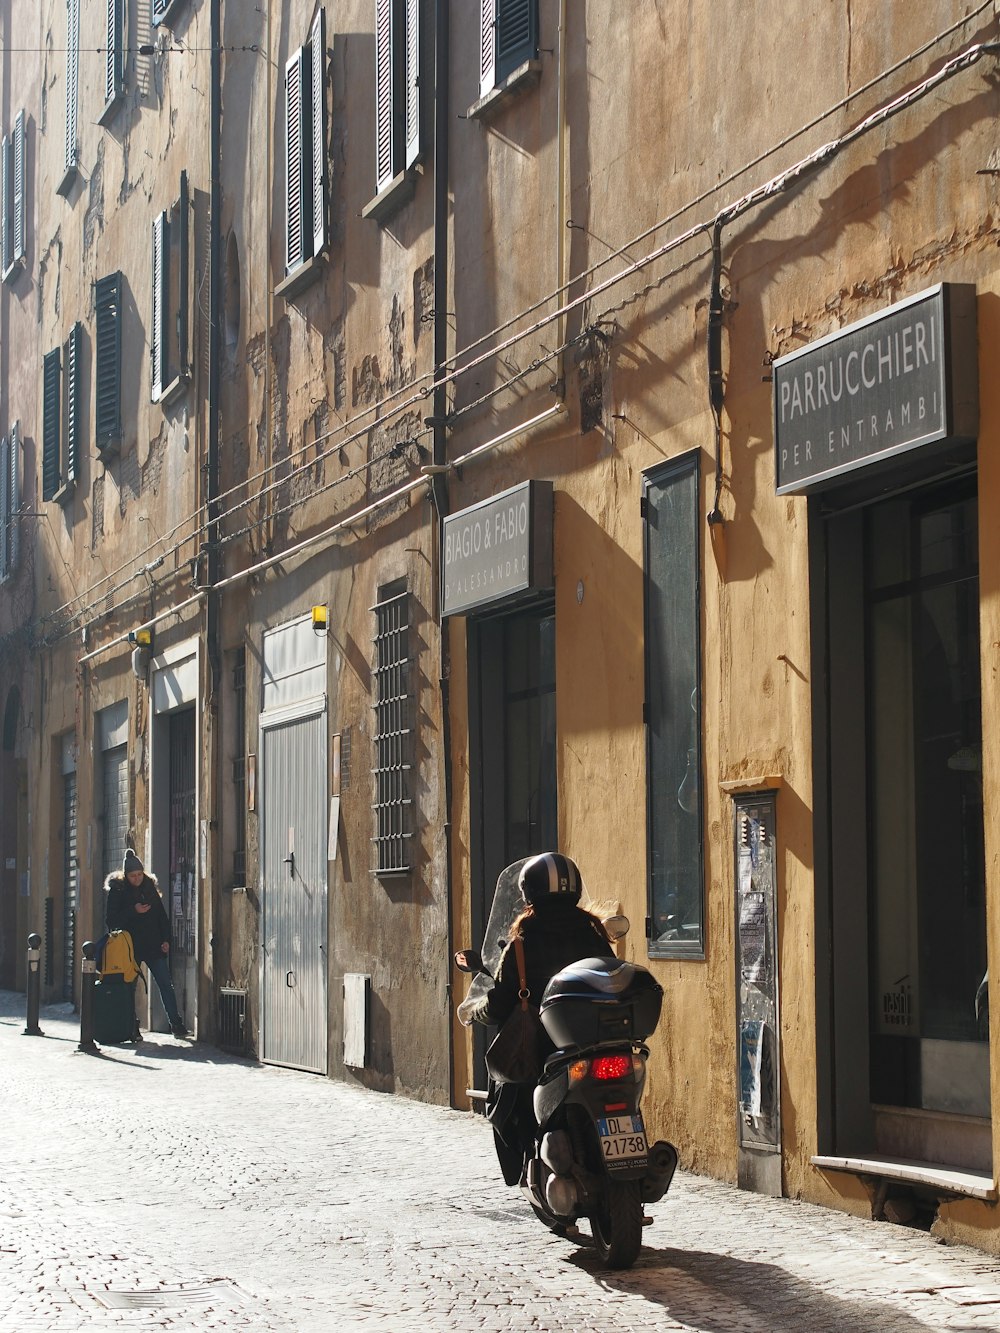 a person on a motorcycle in an alleyway